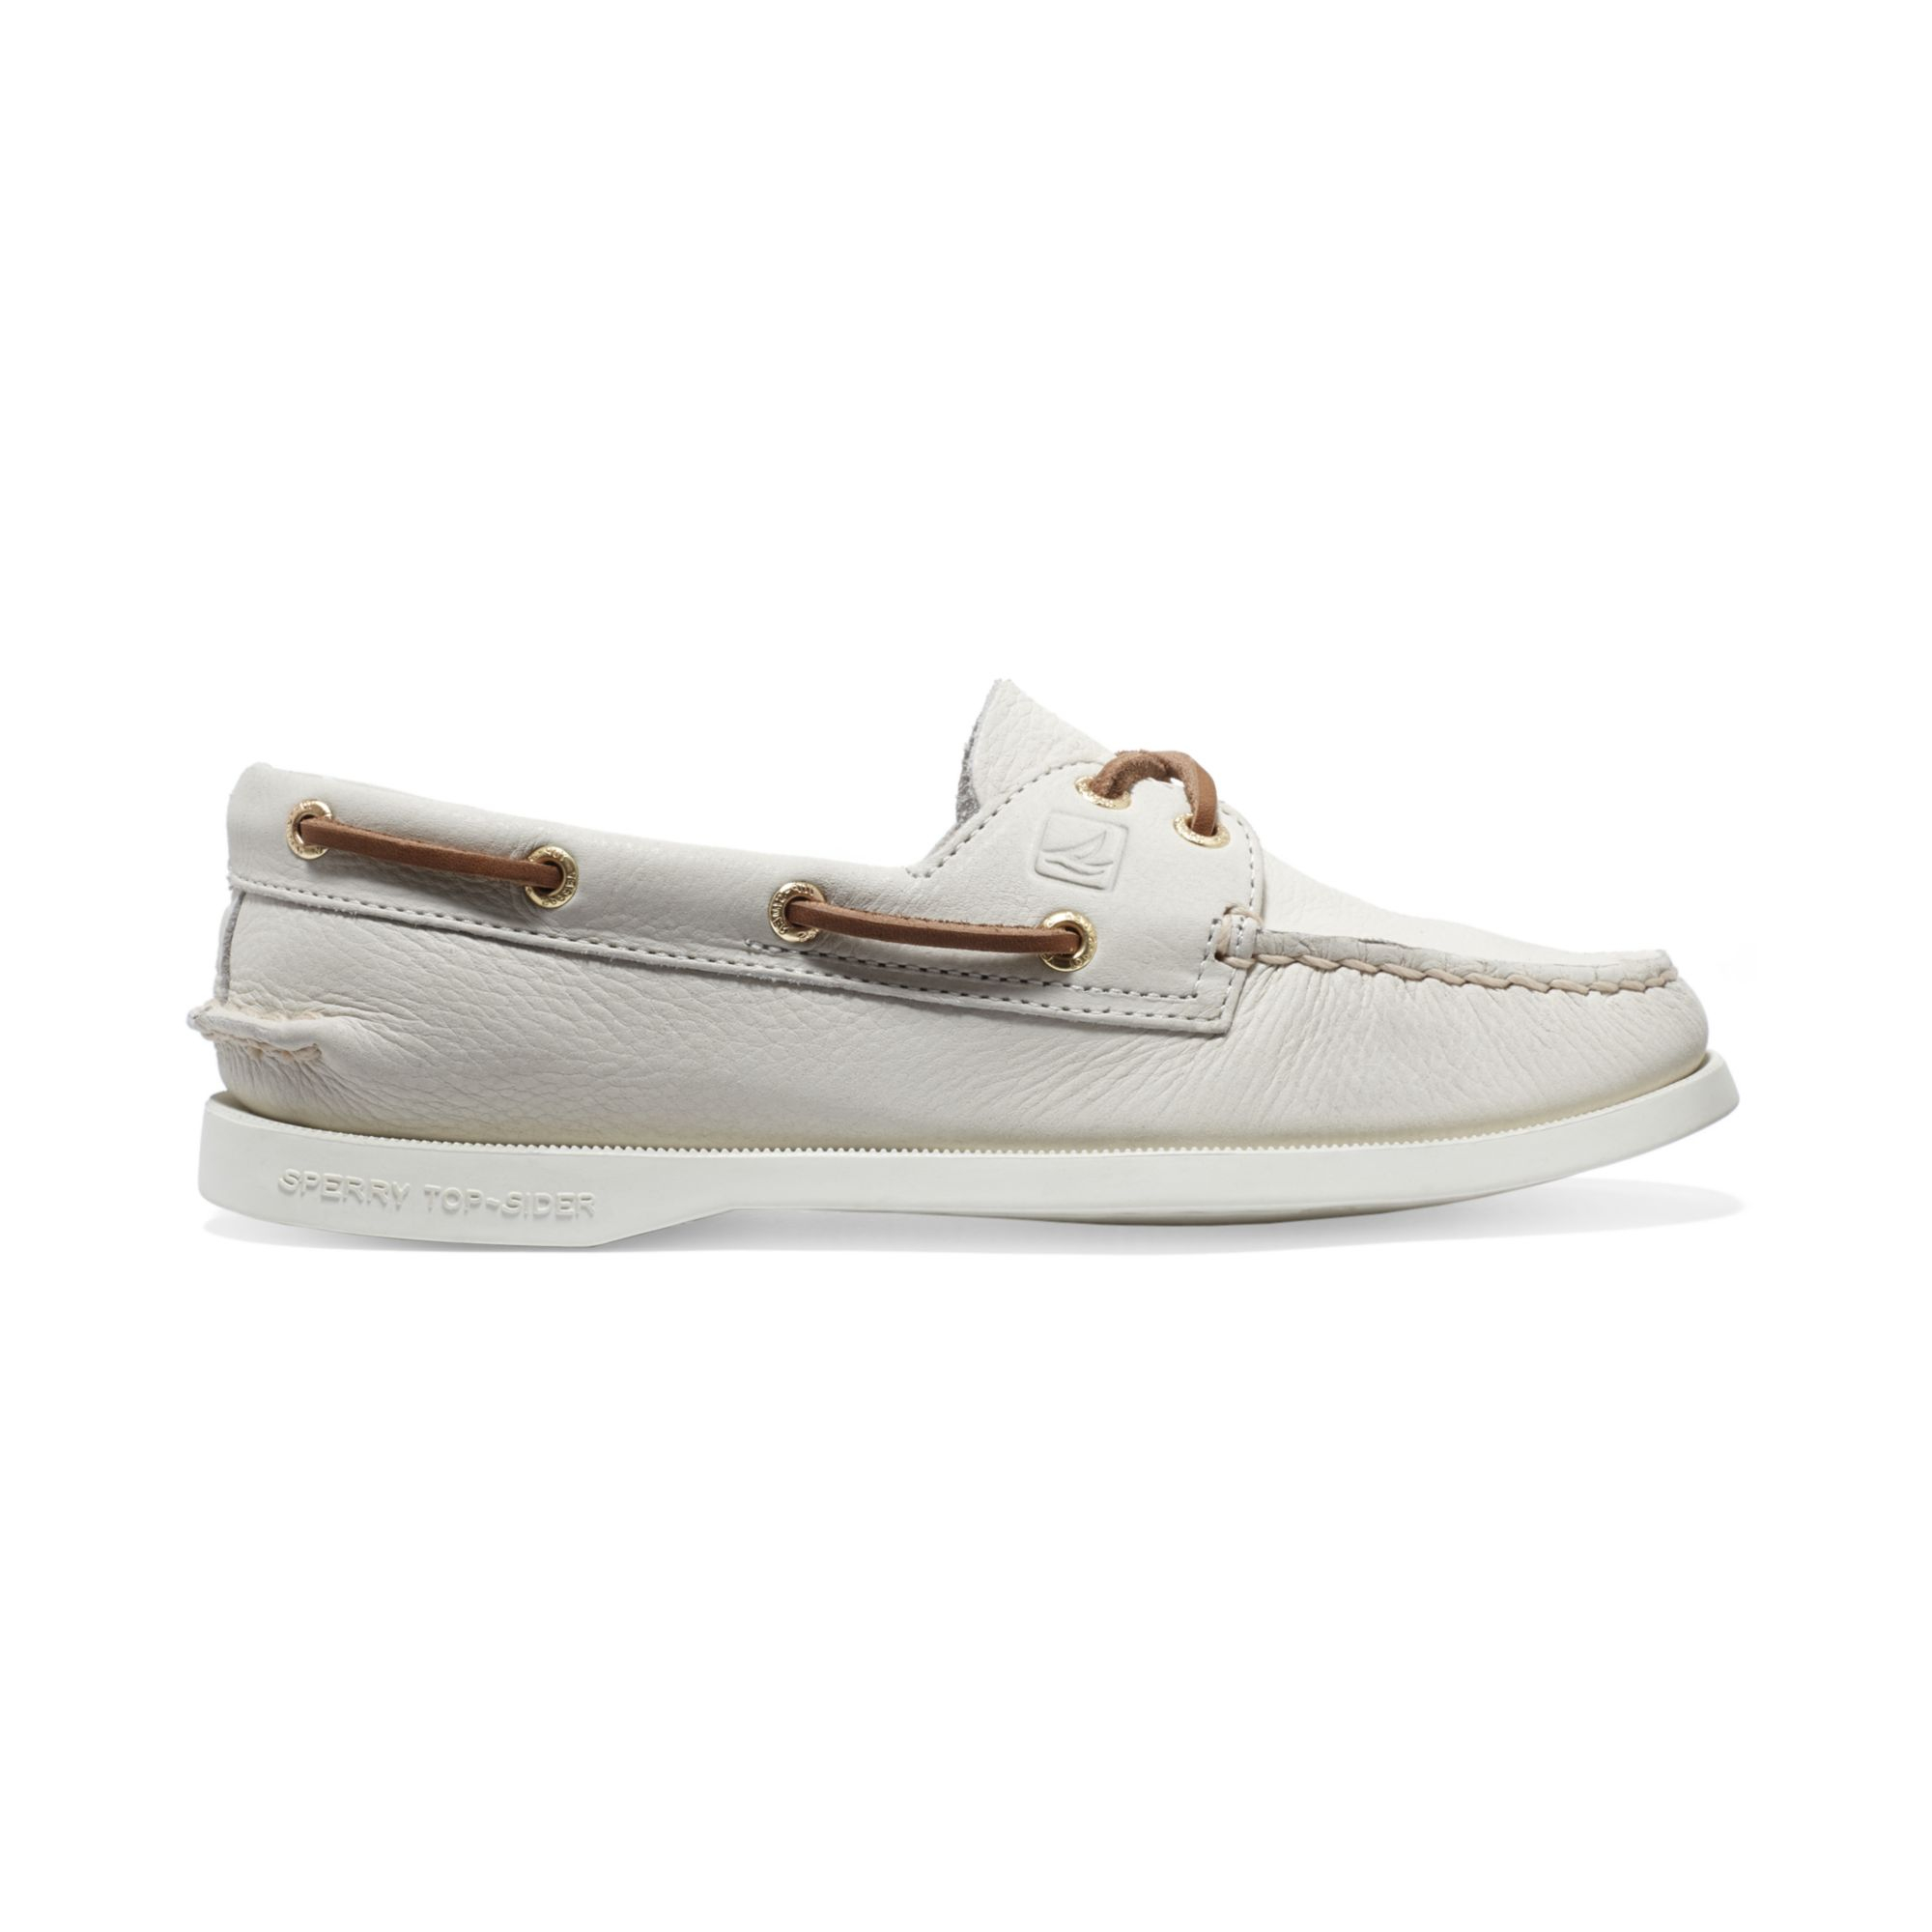 white sperry boat shoes womens